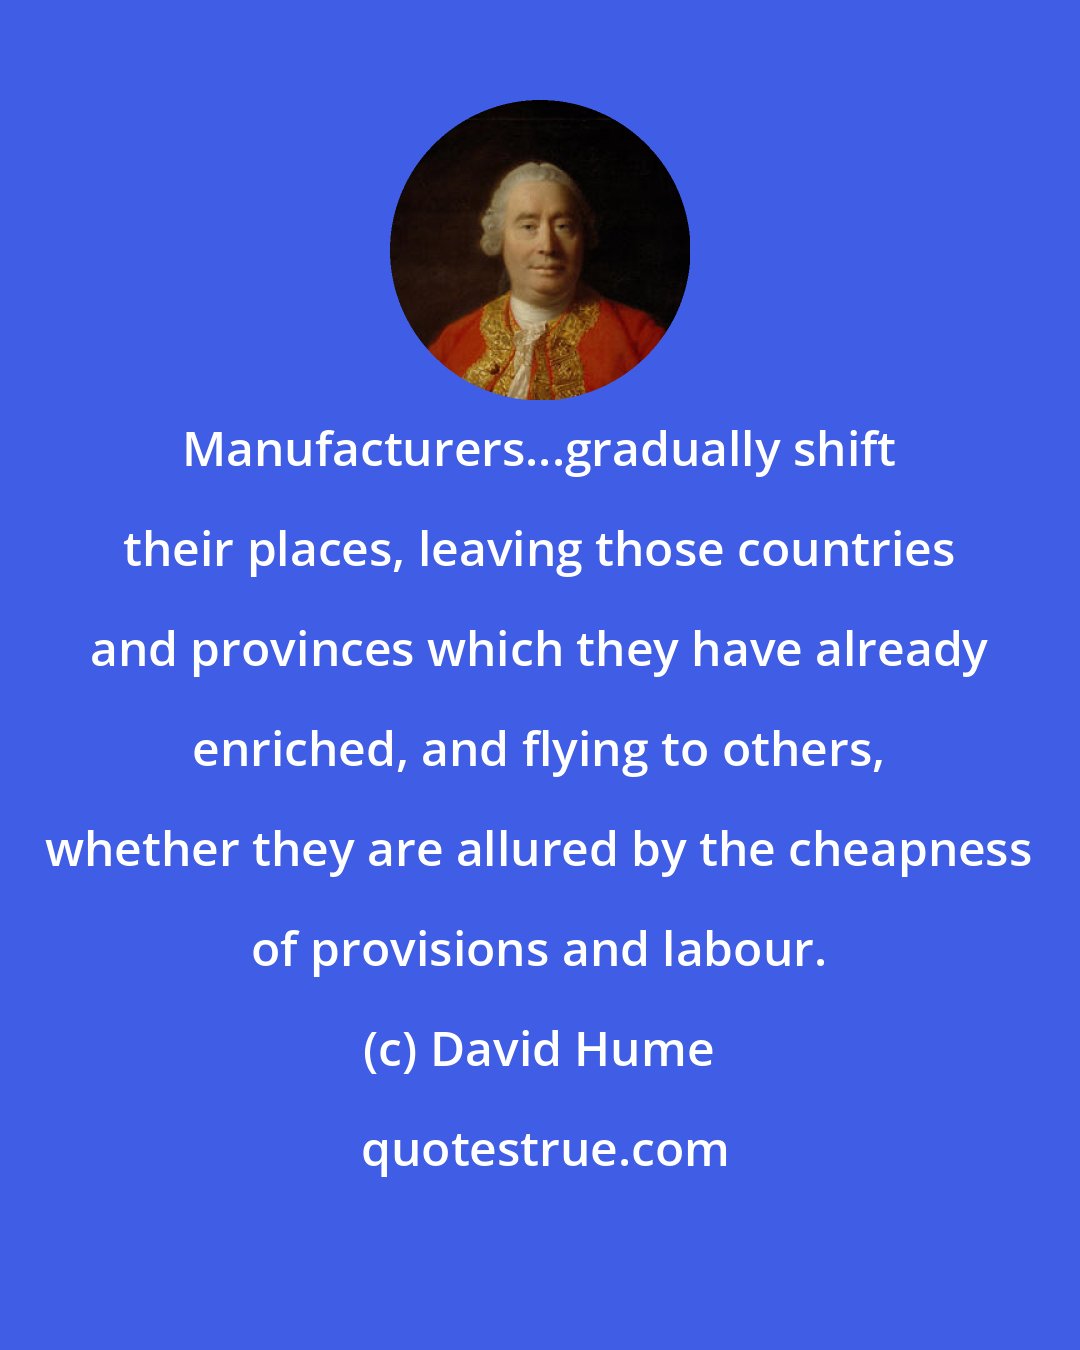 David Hume: Manufacturers...gradually shift their places, leaving those countries and provinces which they have already enriched, and flying to others, whether they are allured by the cheapness of provisions and labour.